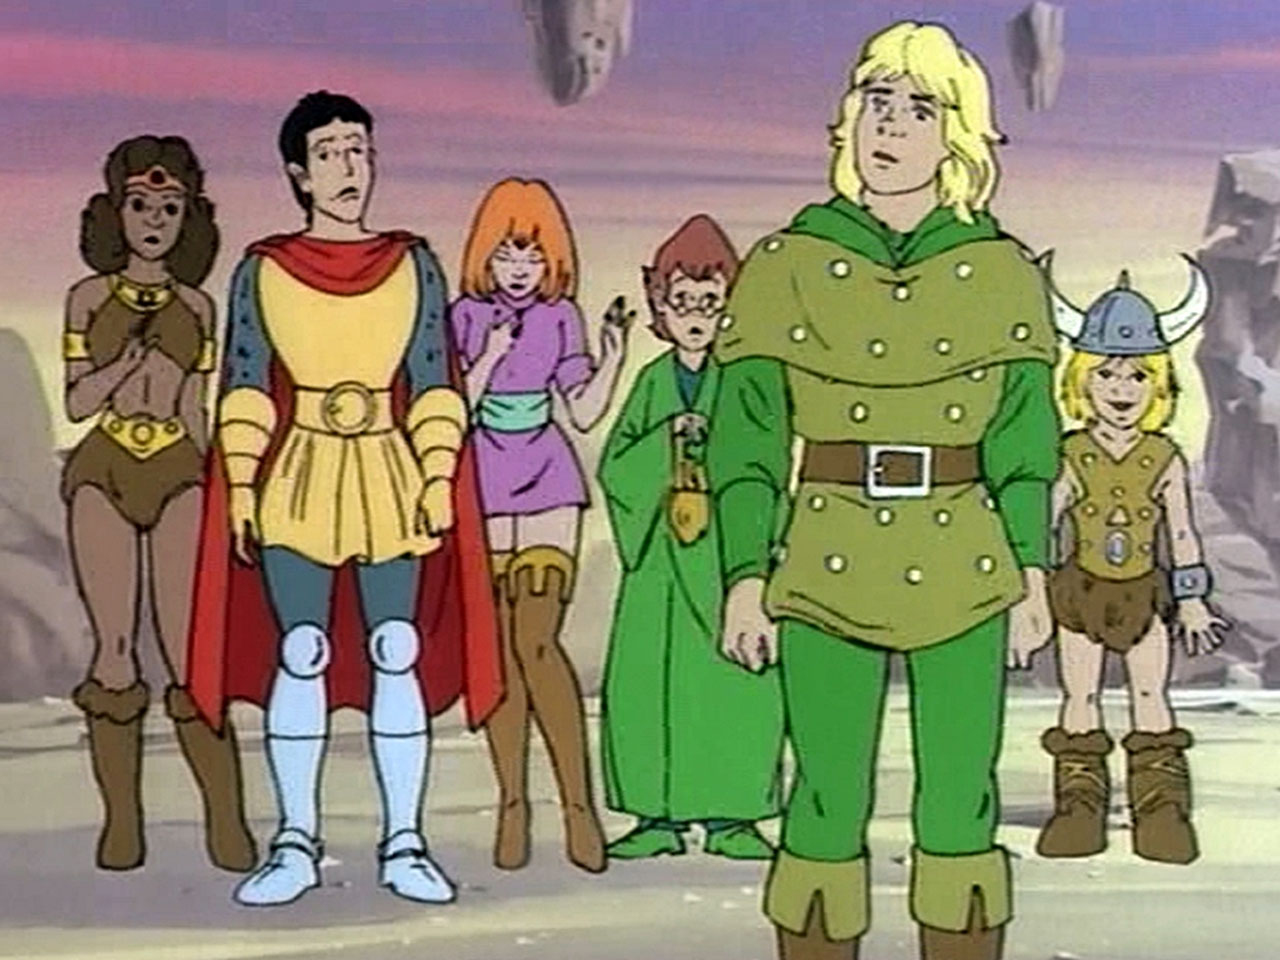 Dungeons & Dragons movie clip shows off 1980s cartoon cameo The Nerdy